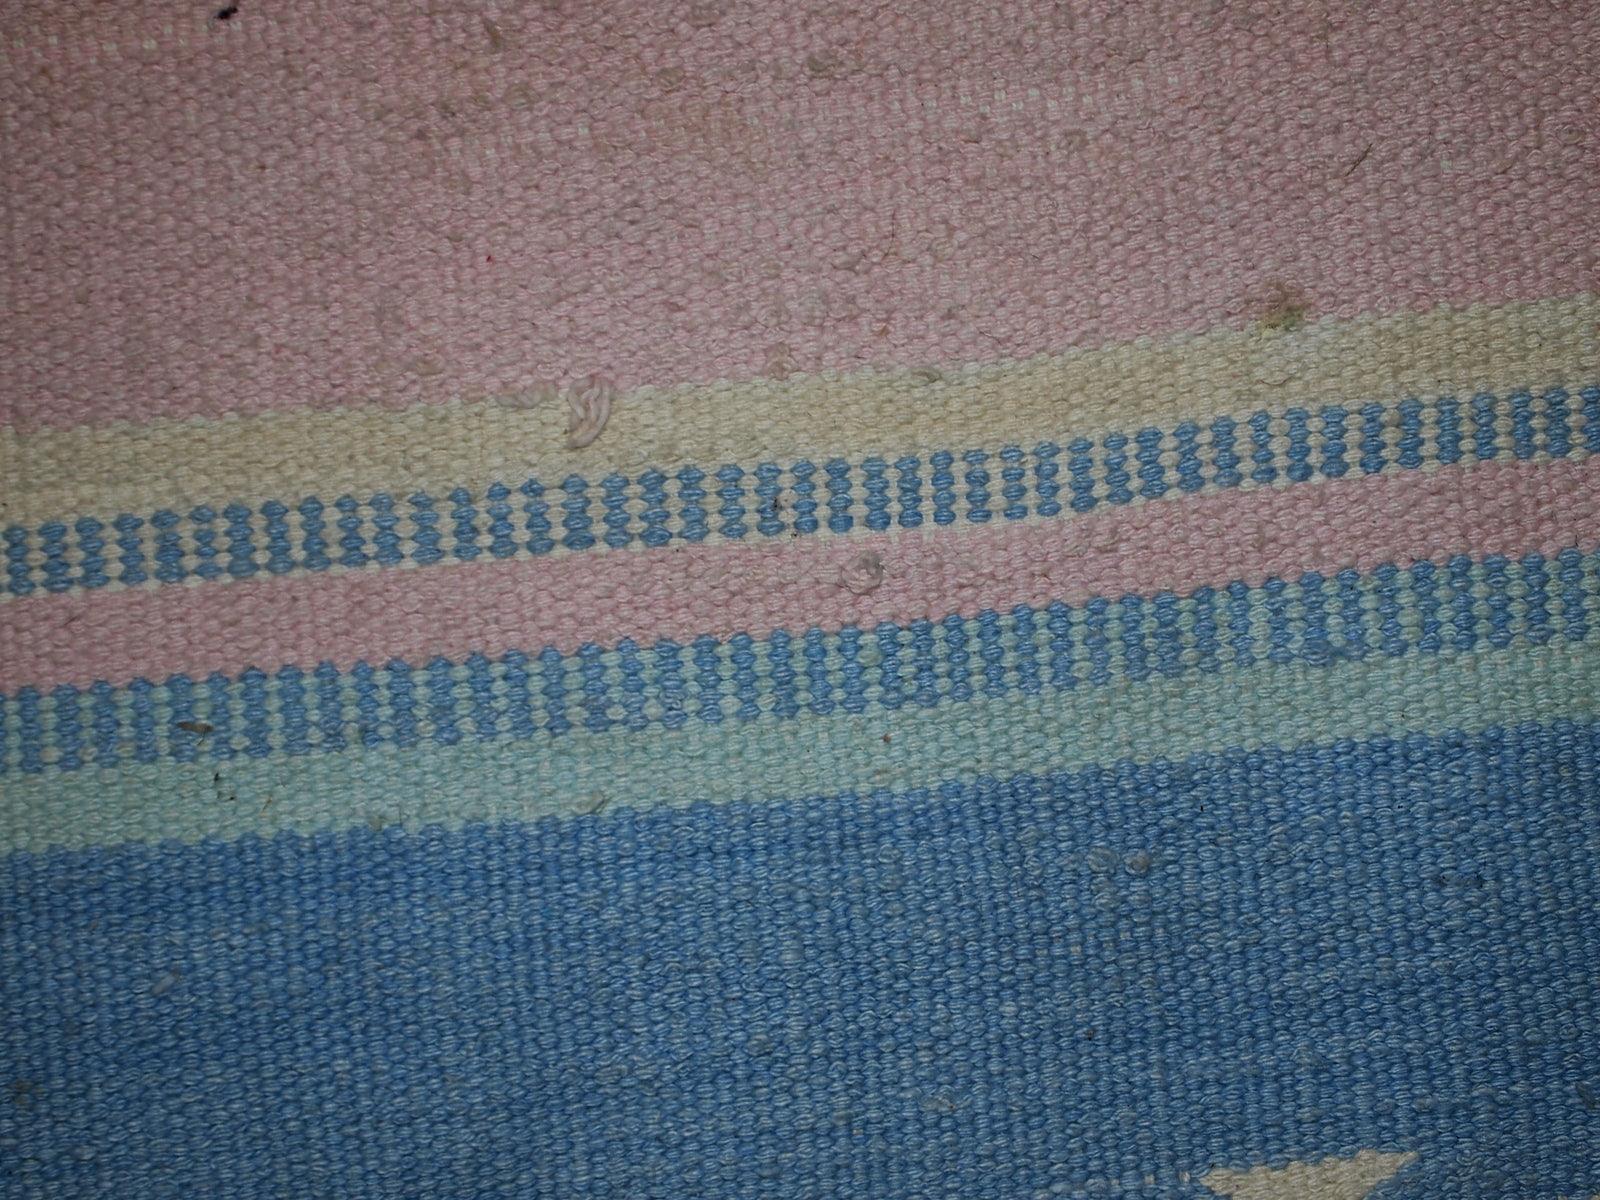 Close-up view of the kilim's delicate pastel blue and sea blue stripes.